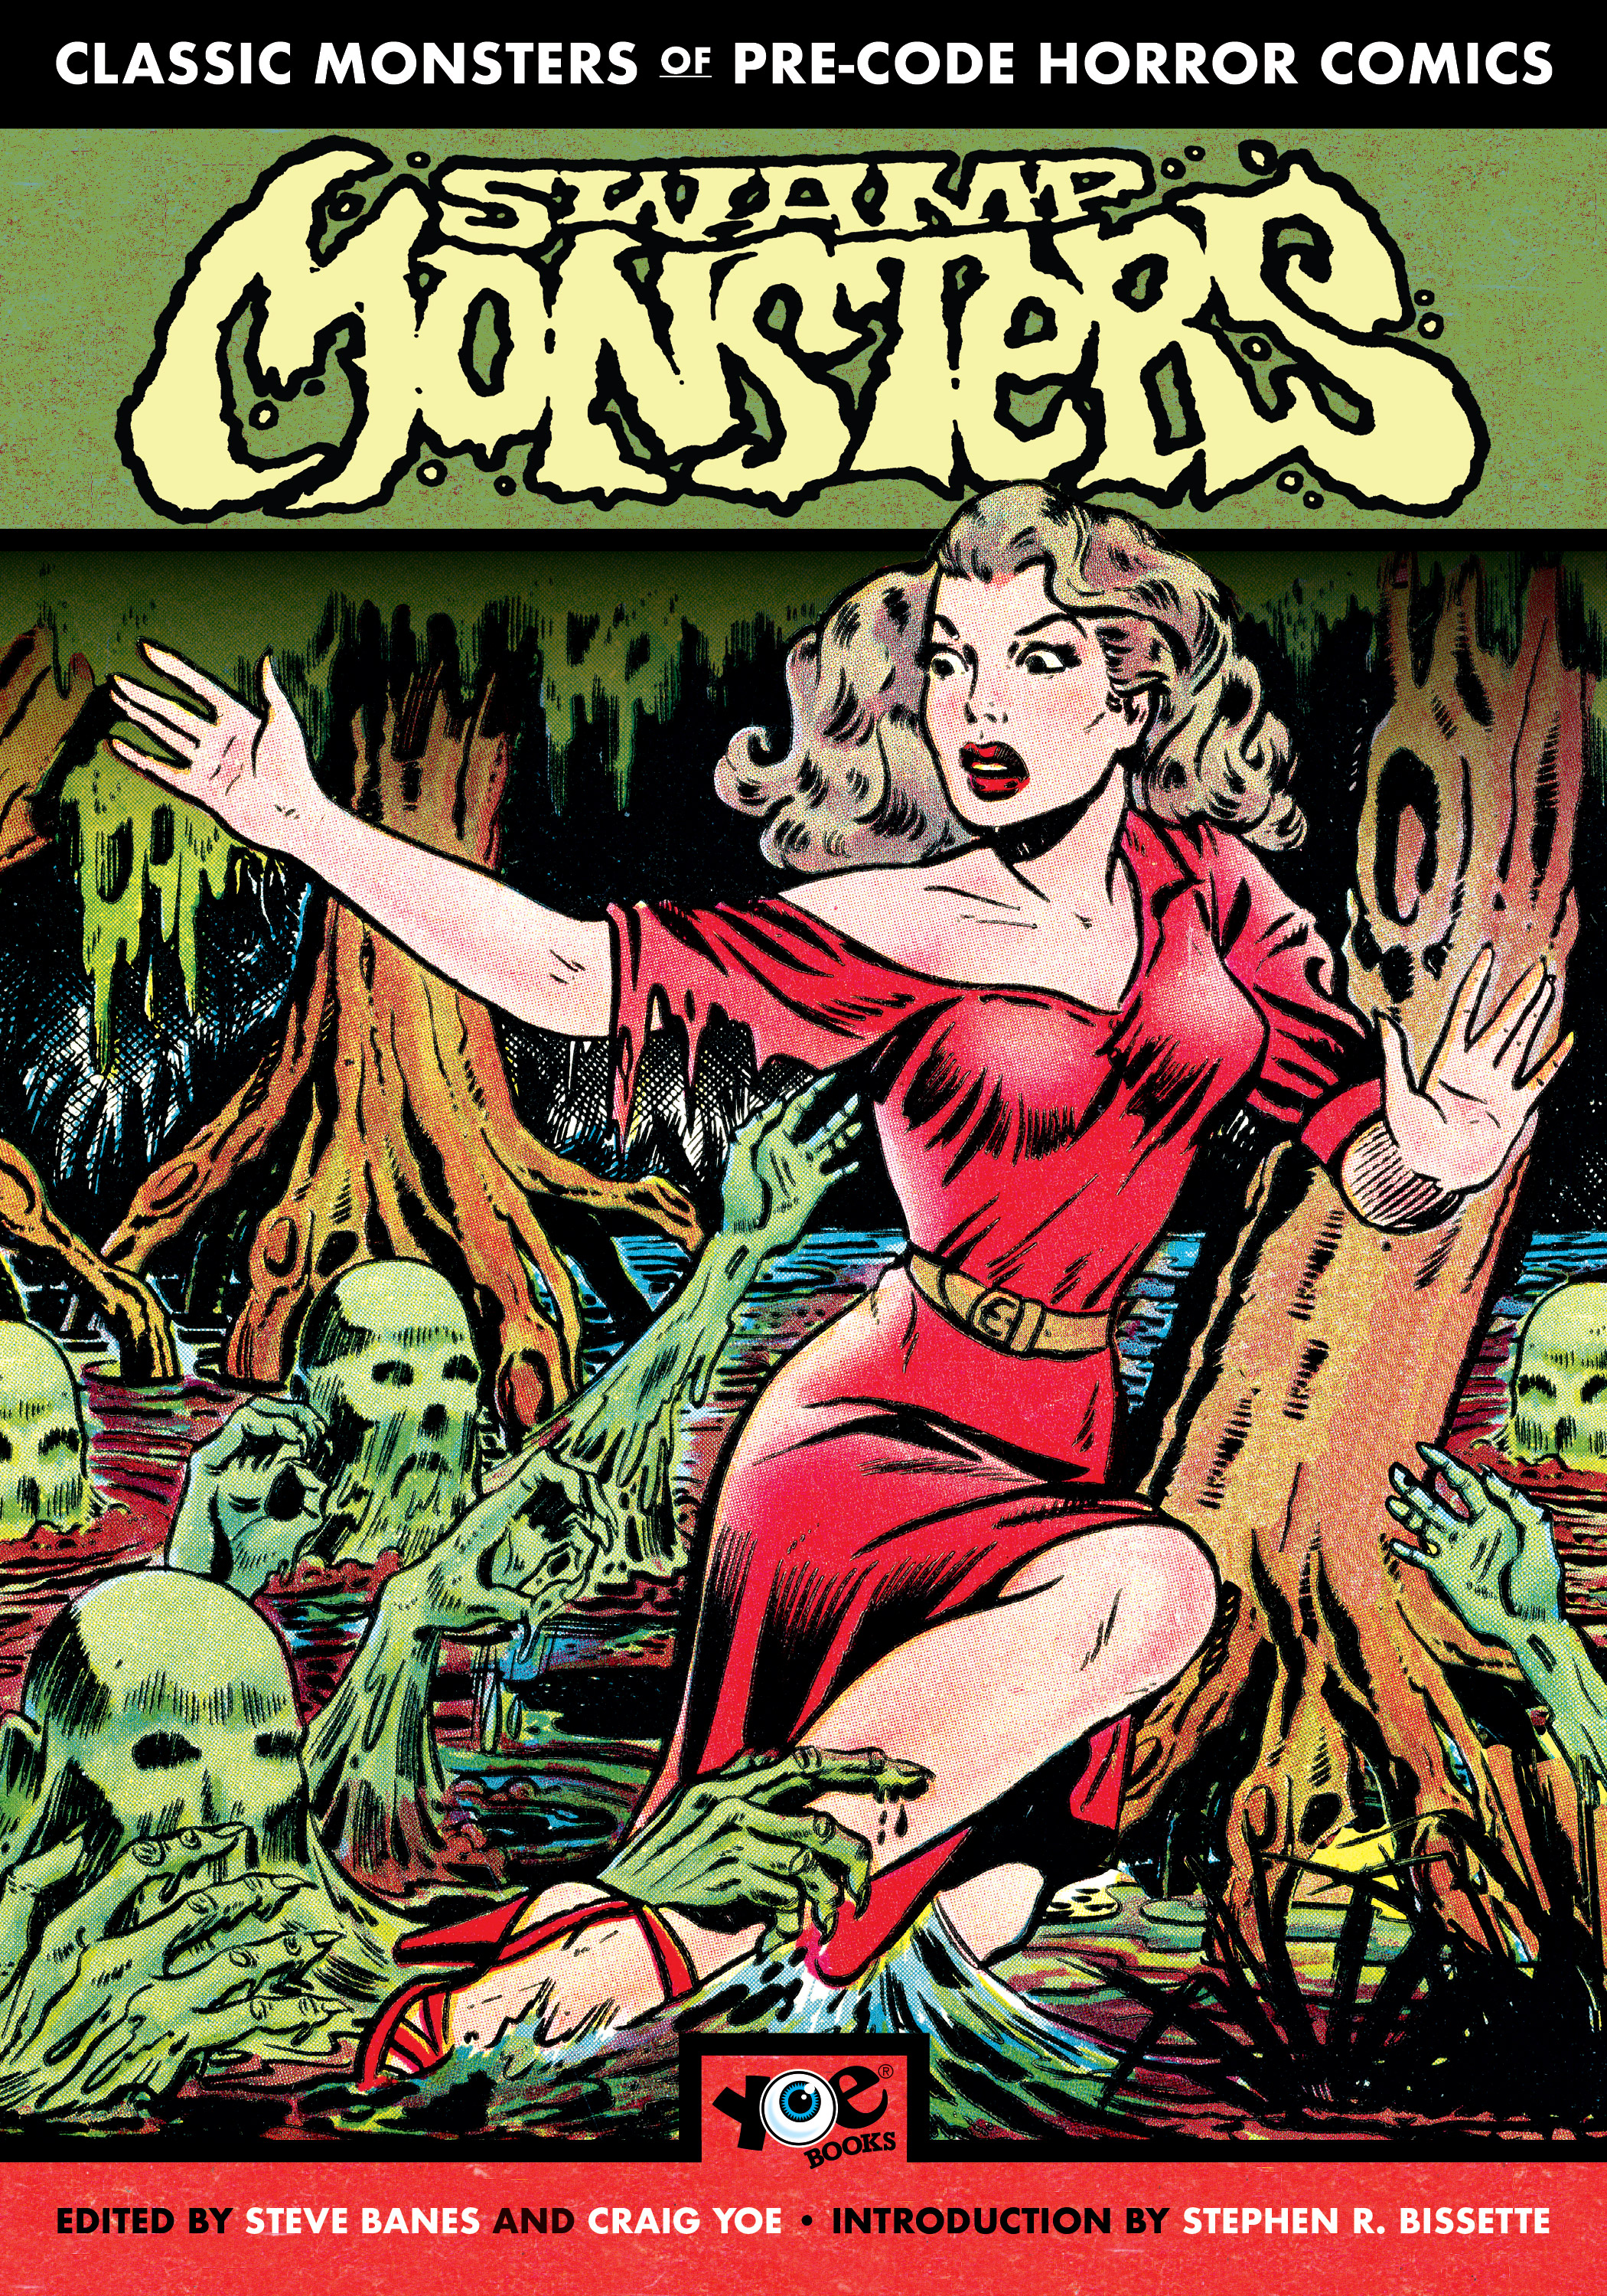 Read online Classic Monsters of Pre-Code Horror Comics: Swamp Monsters comic -  Issue # TPB - 1